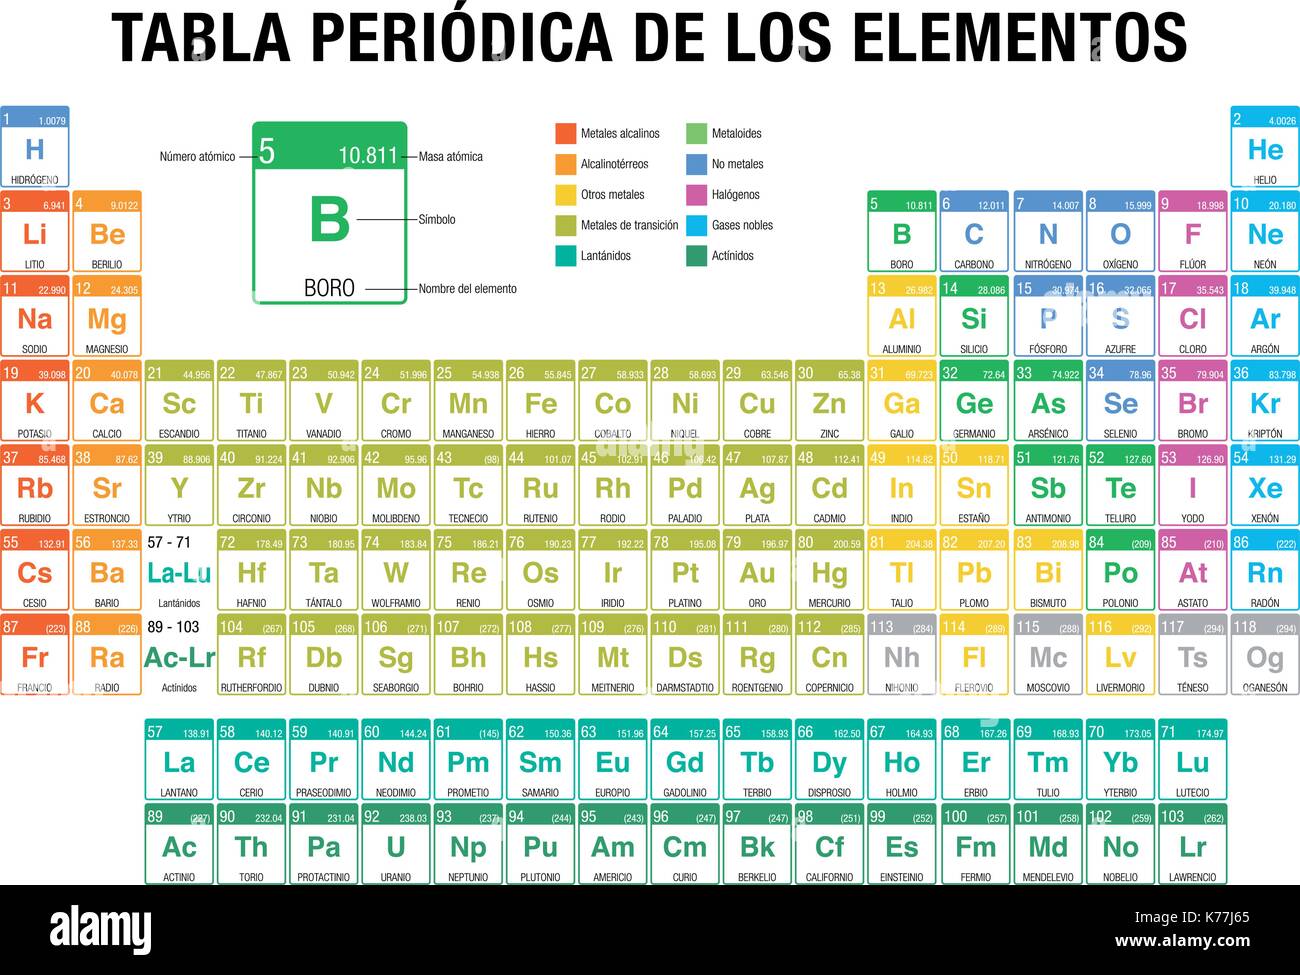 TABLA PERIODICA DE LOS ELEMENTOS -Periodic Table of Elements in Spanish language- with the 4 new elements included on November 28, 2016 Stock Vector